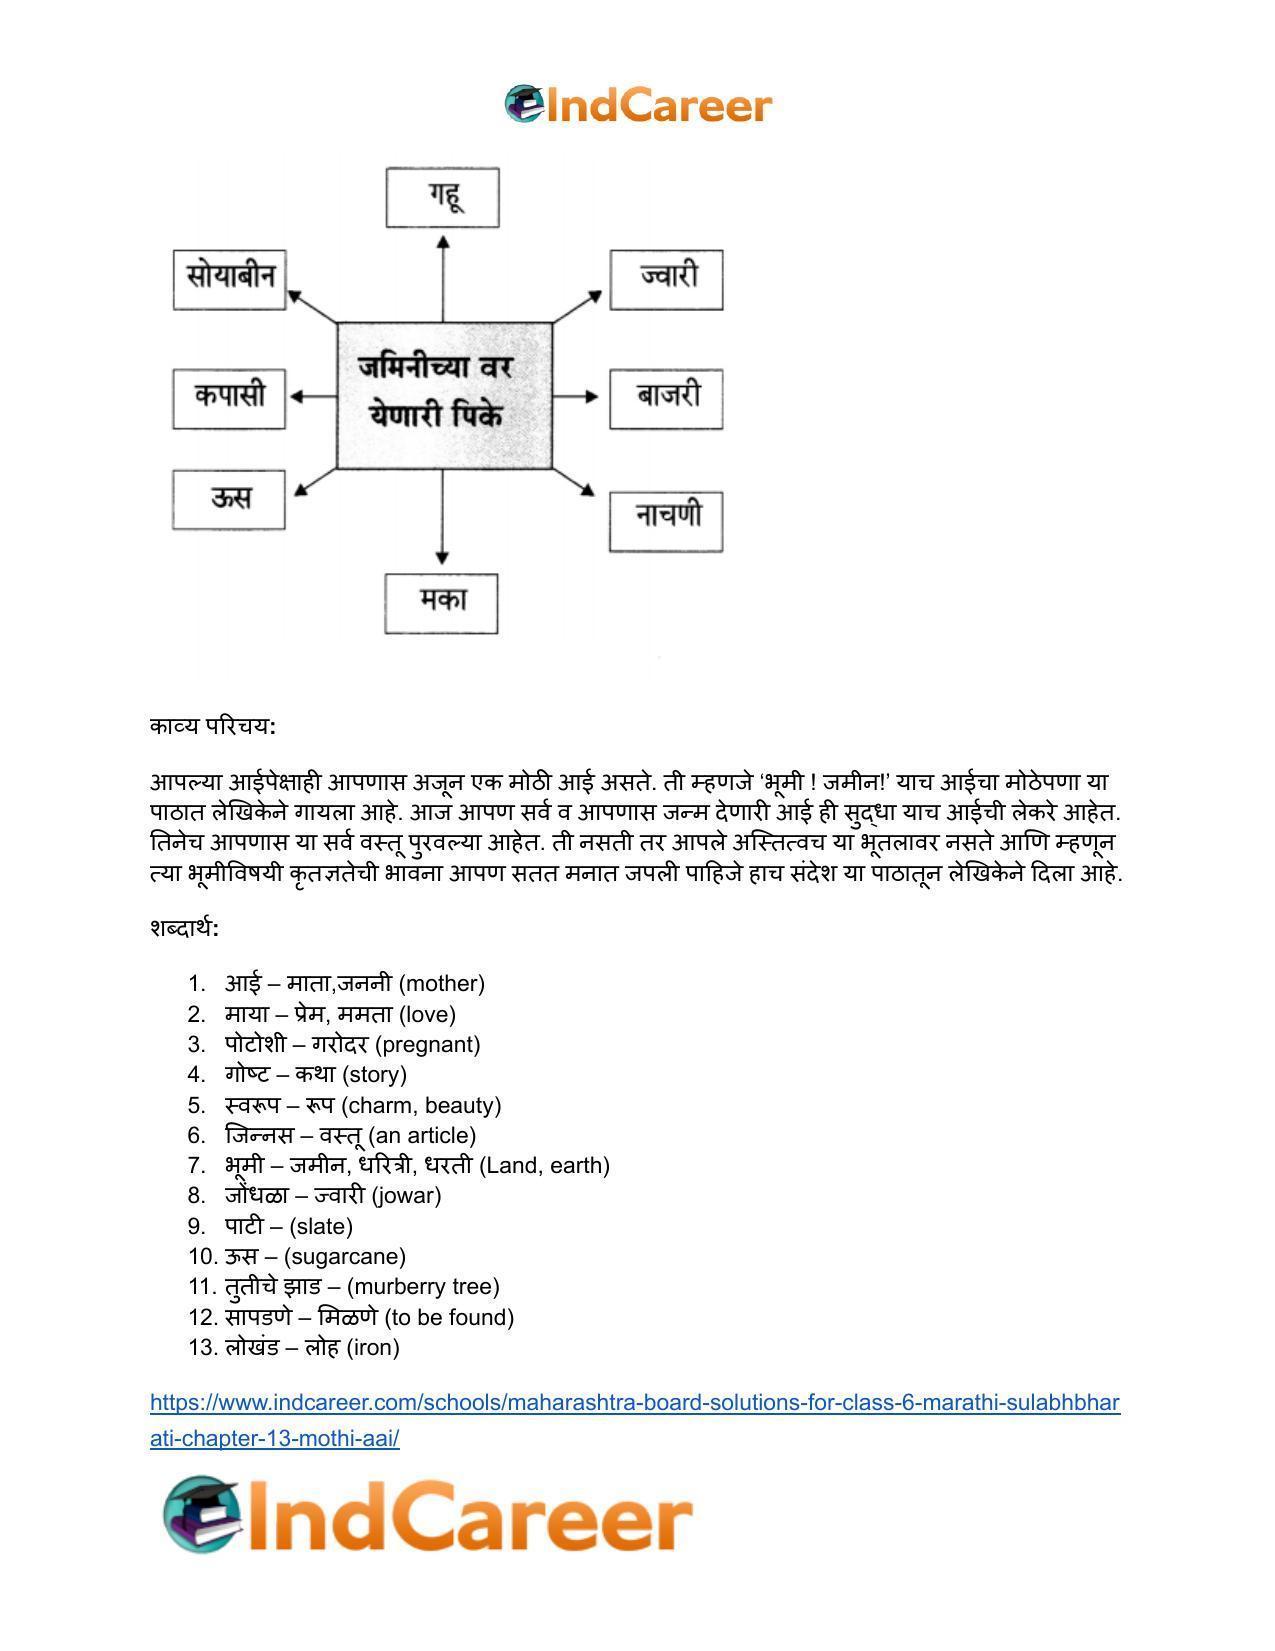 Maharashtra Board Solutions for Class 6- Marathi Sulabhbharati: Chapter 13- मोठी आई - Page 22